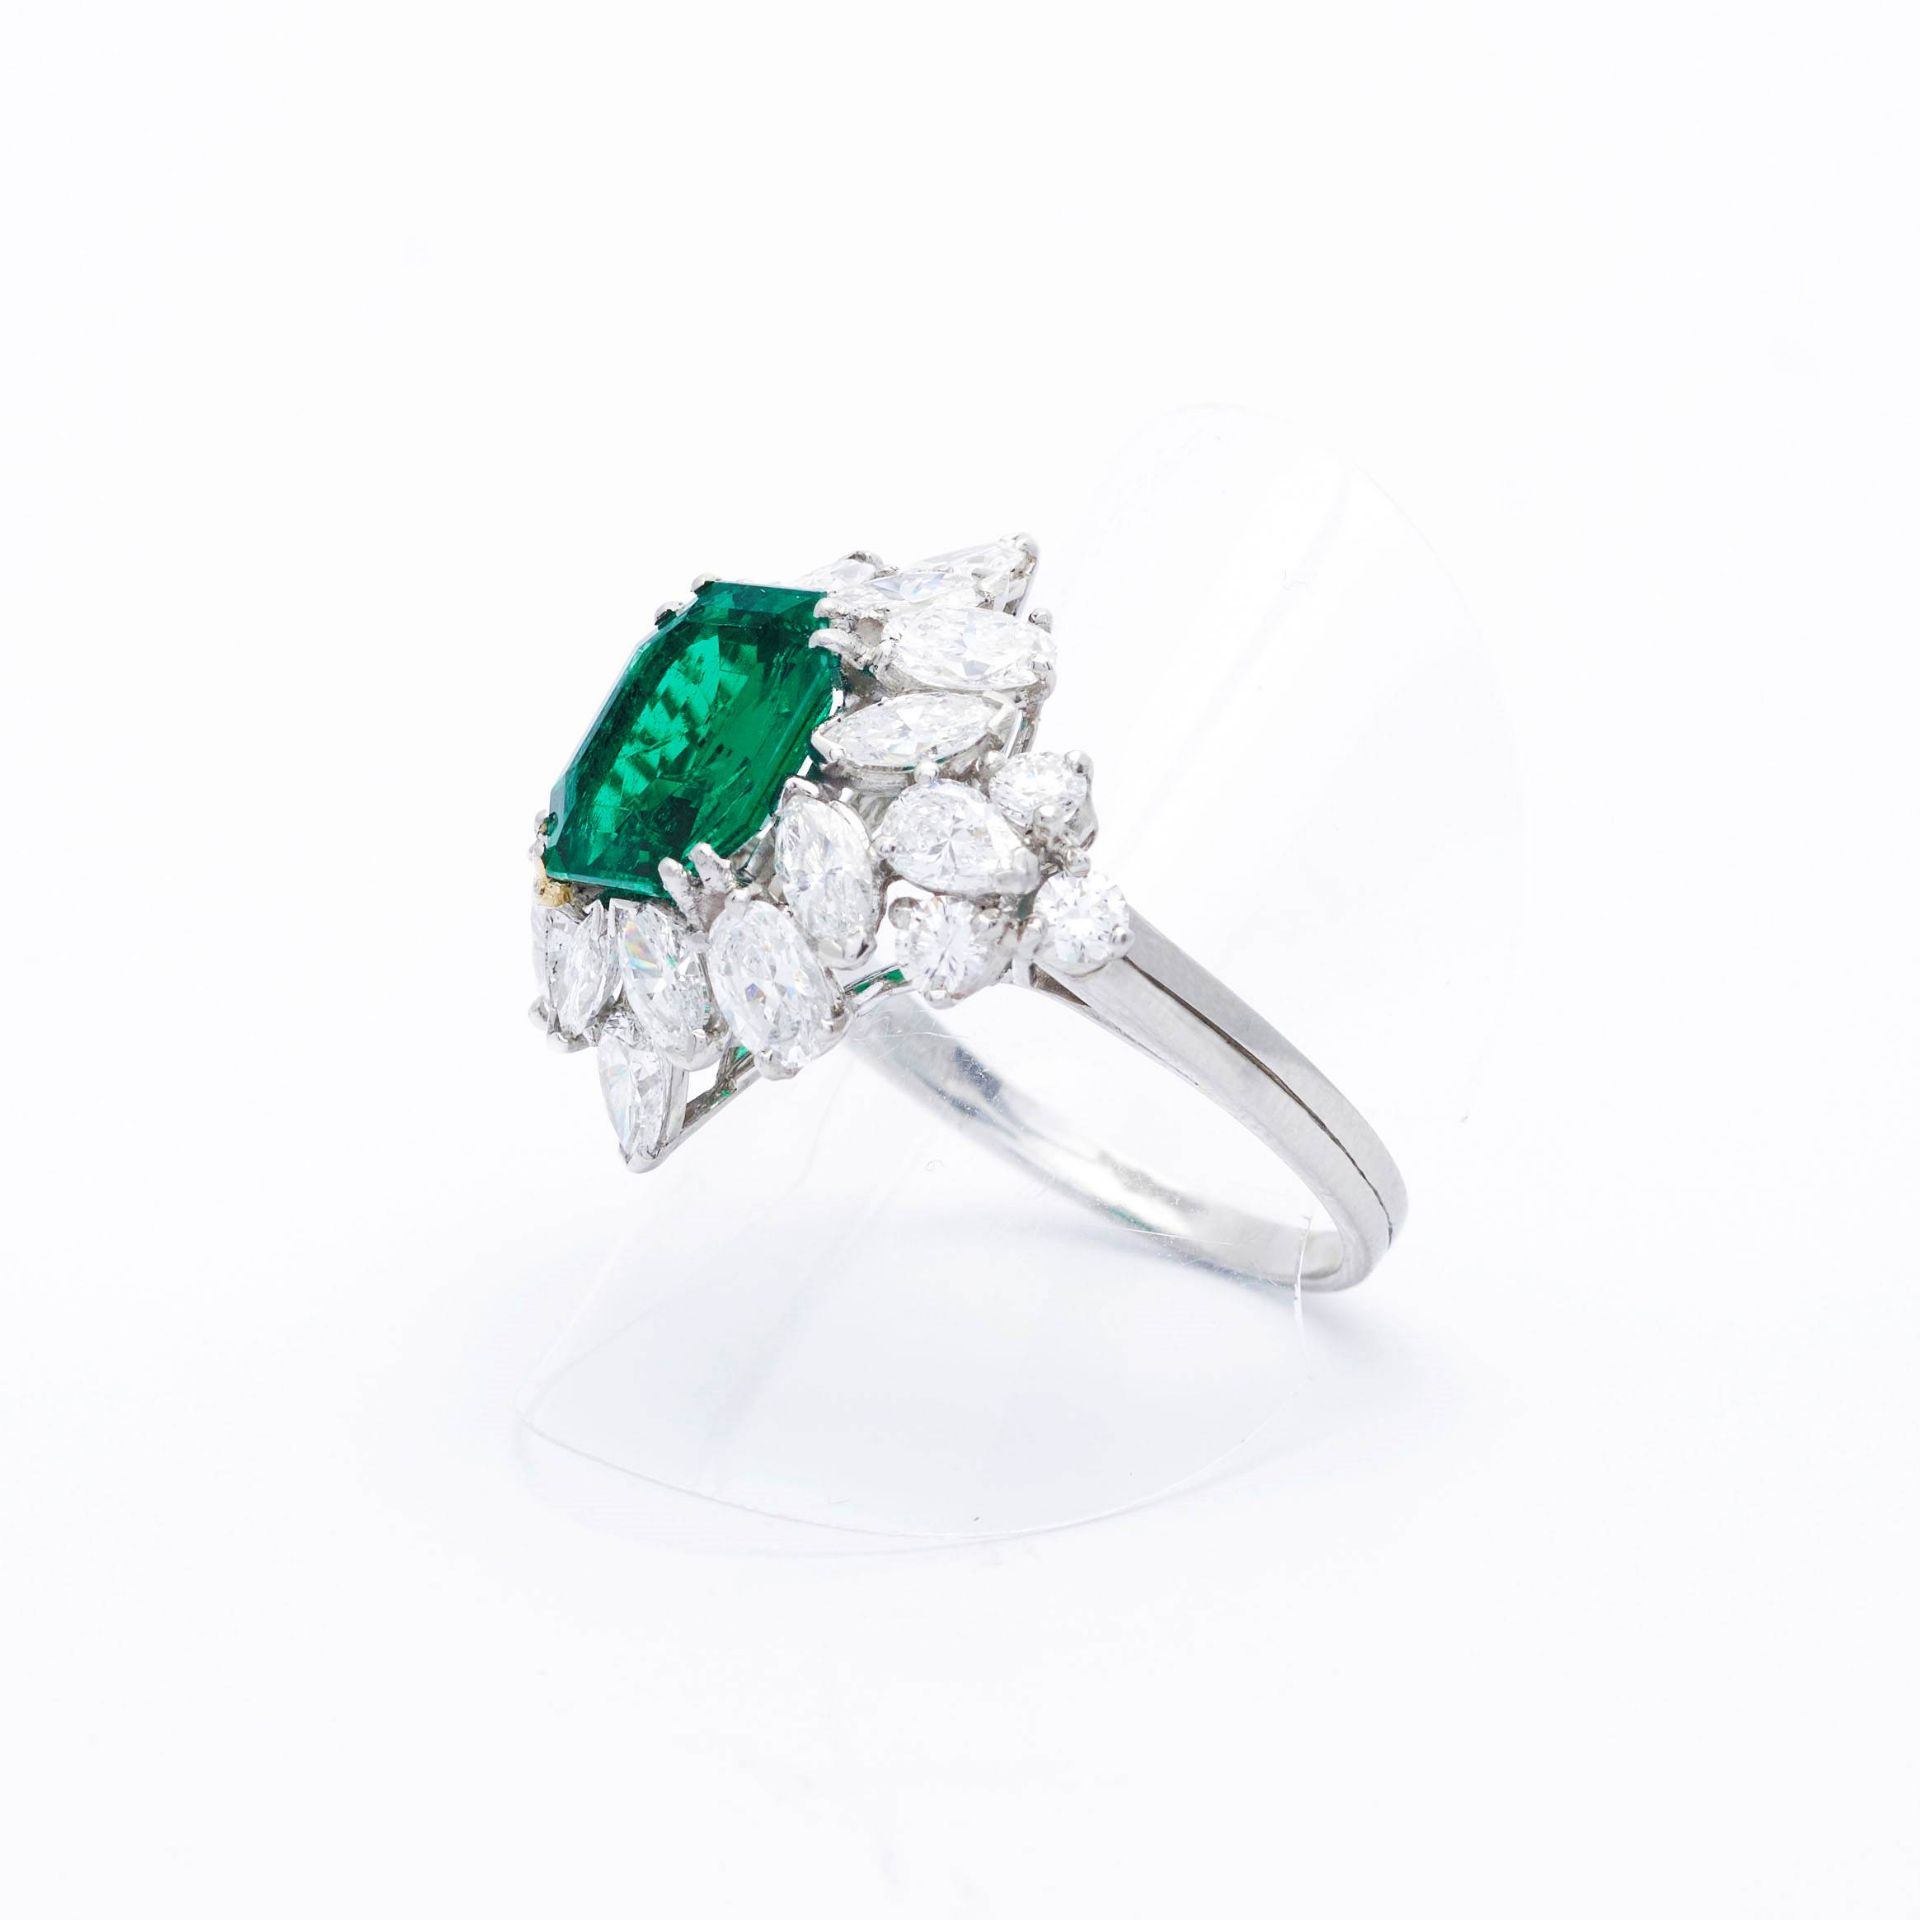 EMERALD AND DIAMOND RING, ca. 1960. - Image 3 of 6